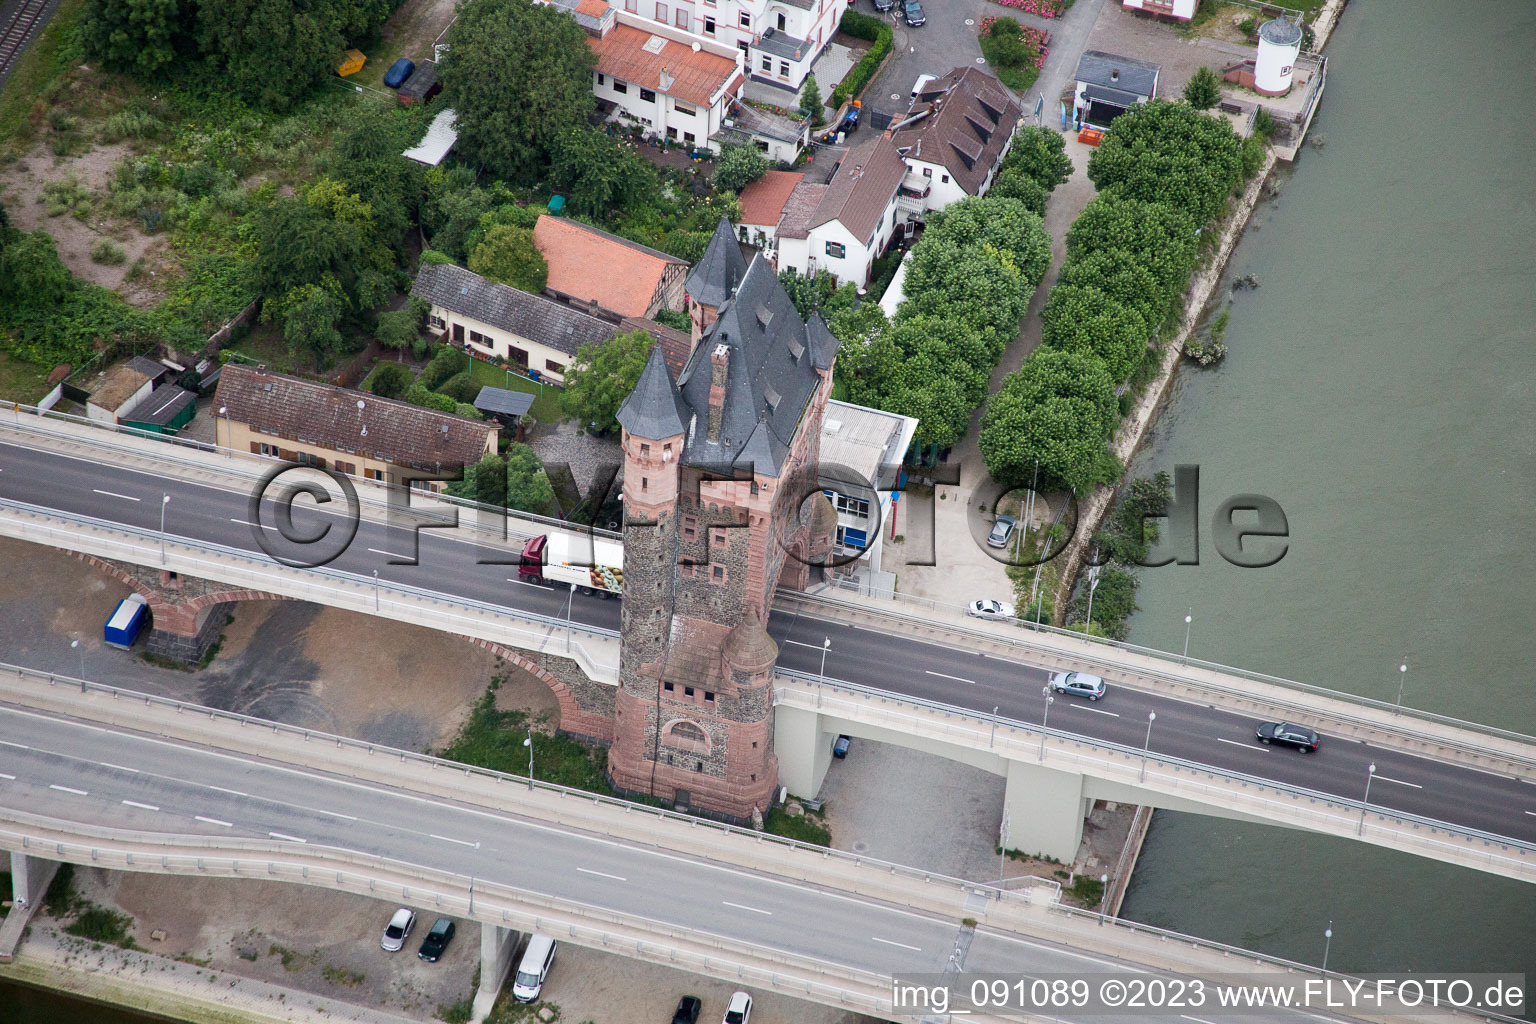 Aerial view of Nibelungen Bridge over the Rhine in Worms in the state Rhineland-Palatinate, Germany